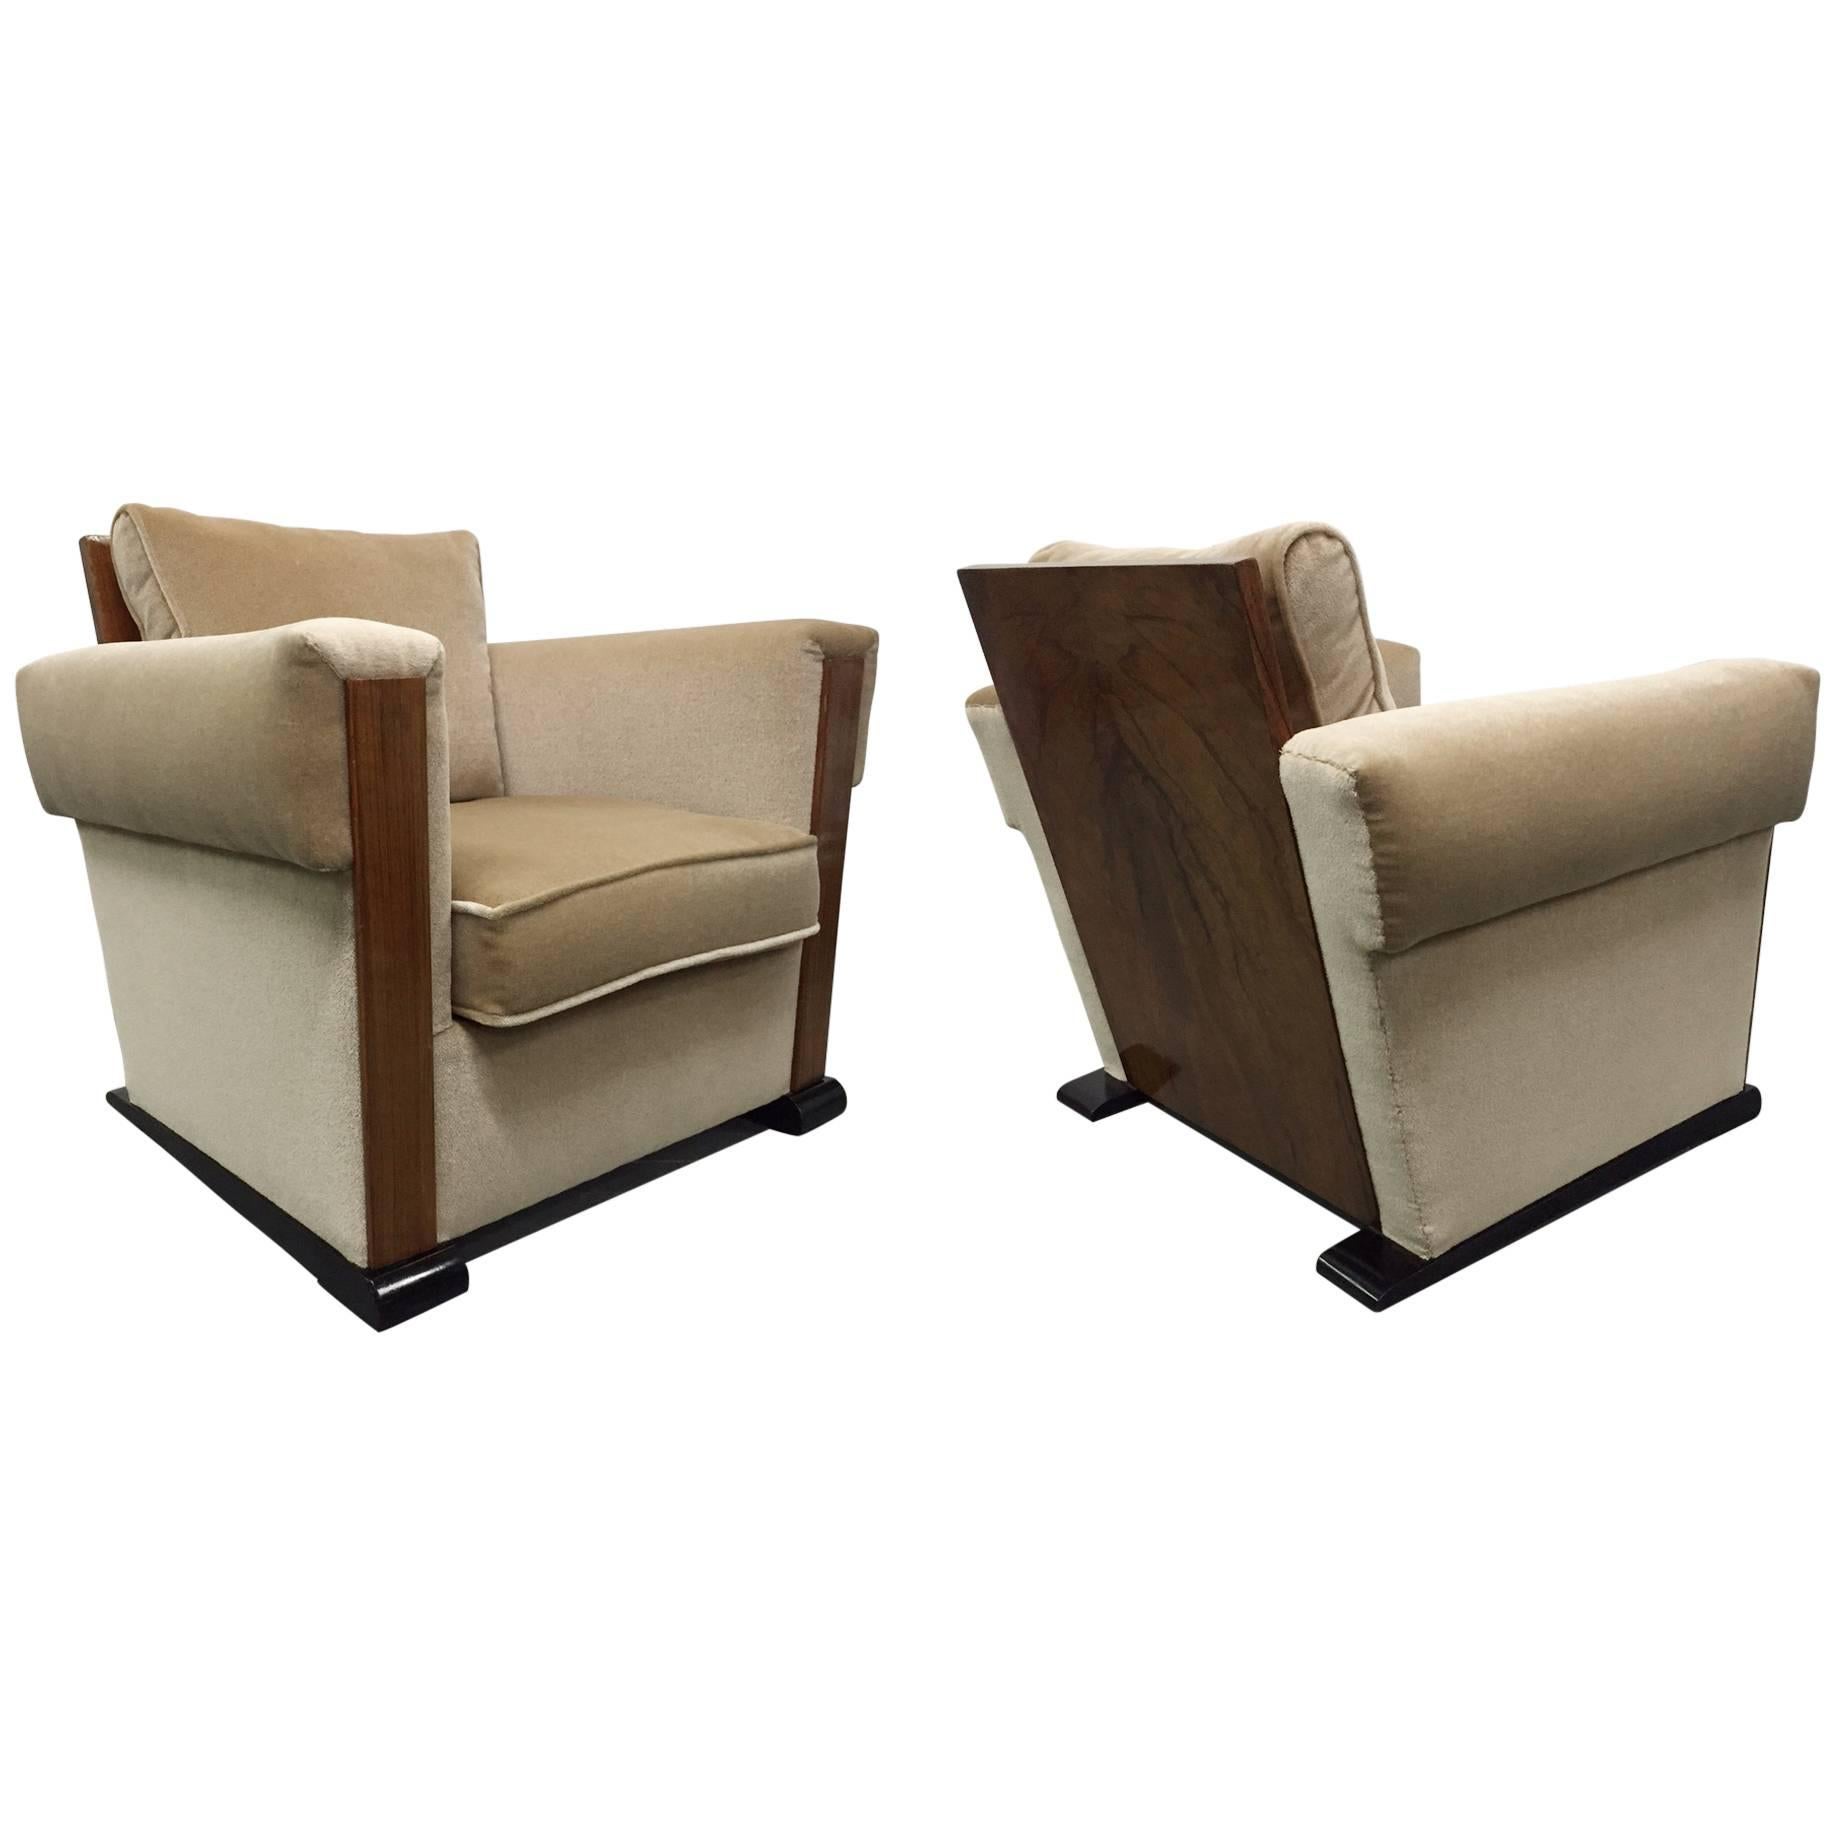 Pair of French Art Deco Lounge Chairs in Mohair